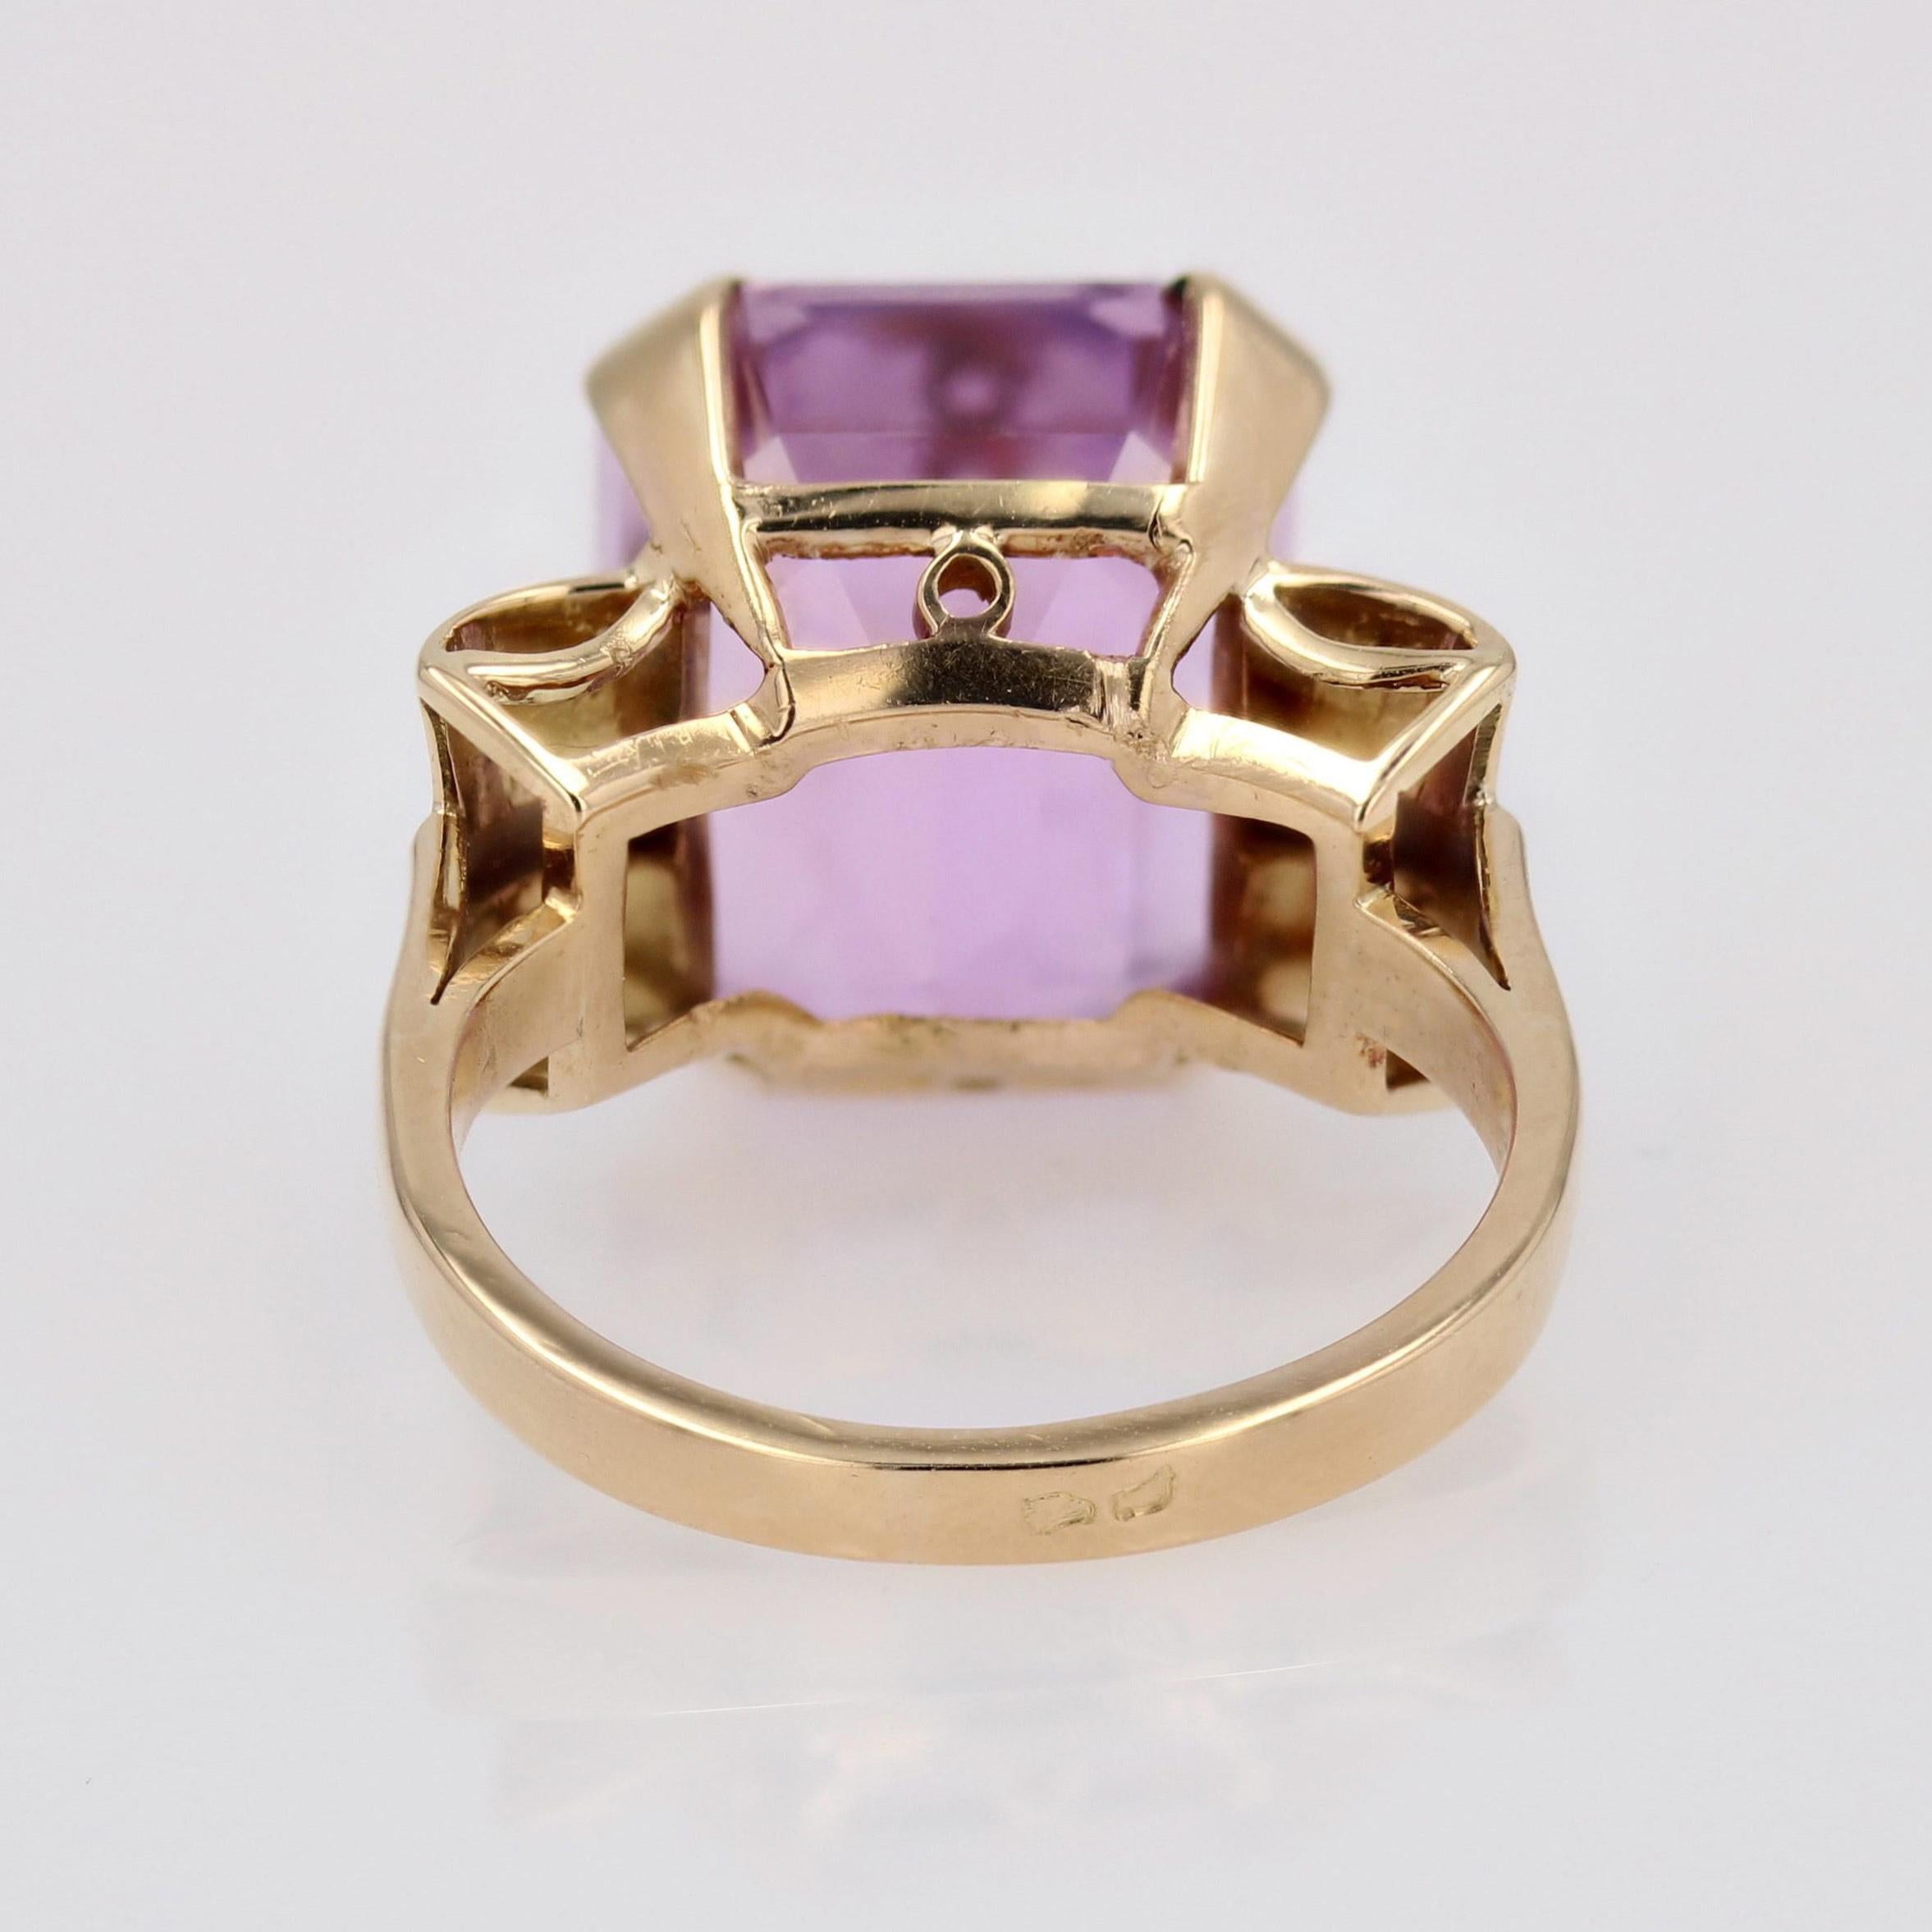 French Retro 1950s 11.29 Carats Kunzite 18 Karat Yellow Gold Cocktail Ring For Sale 11